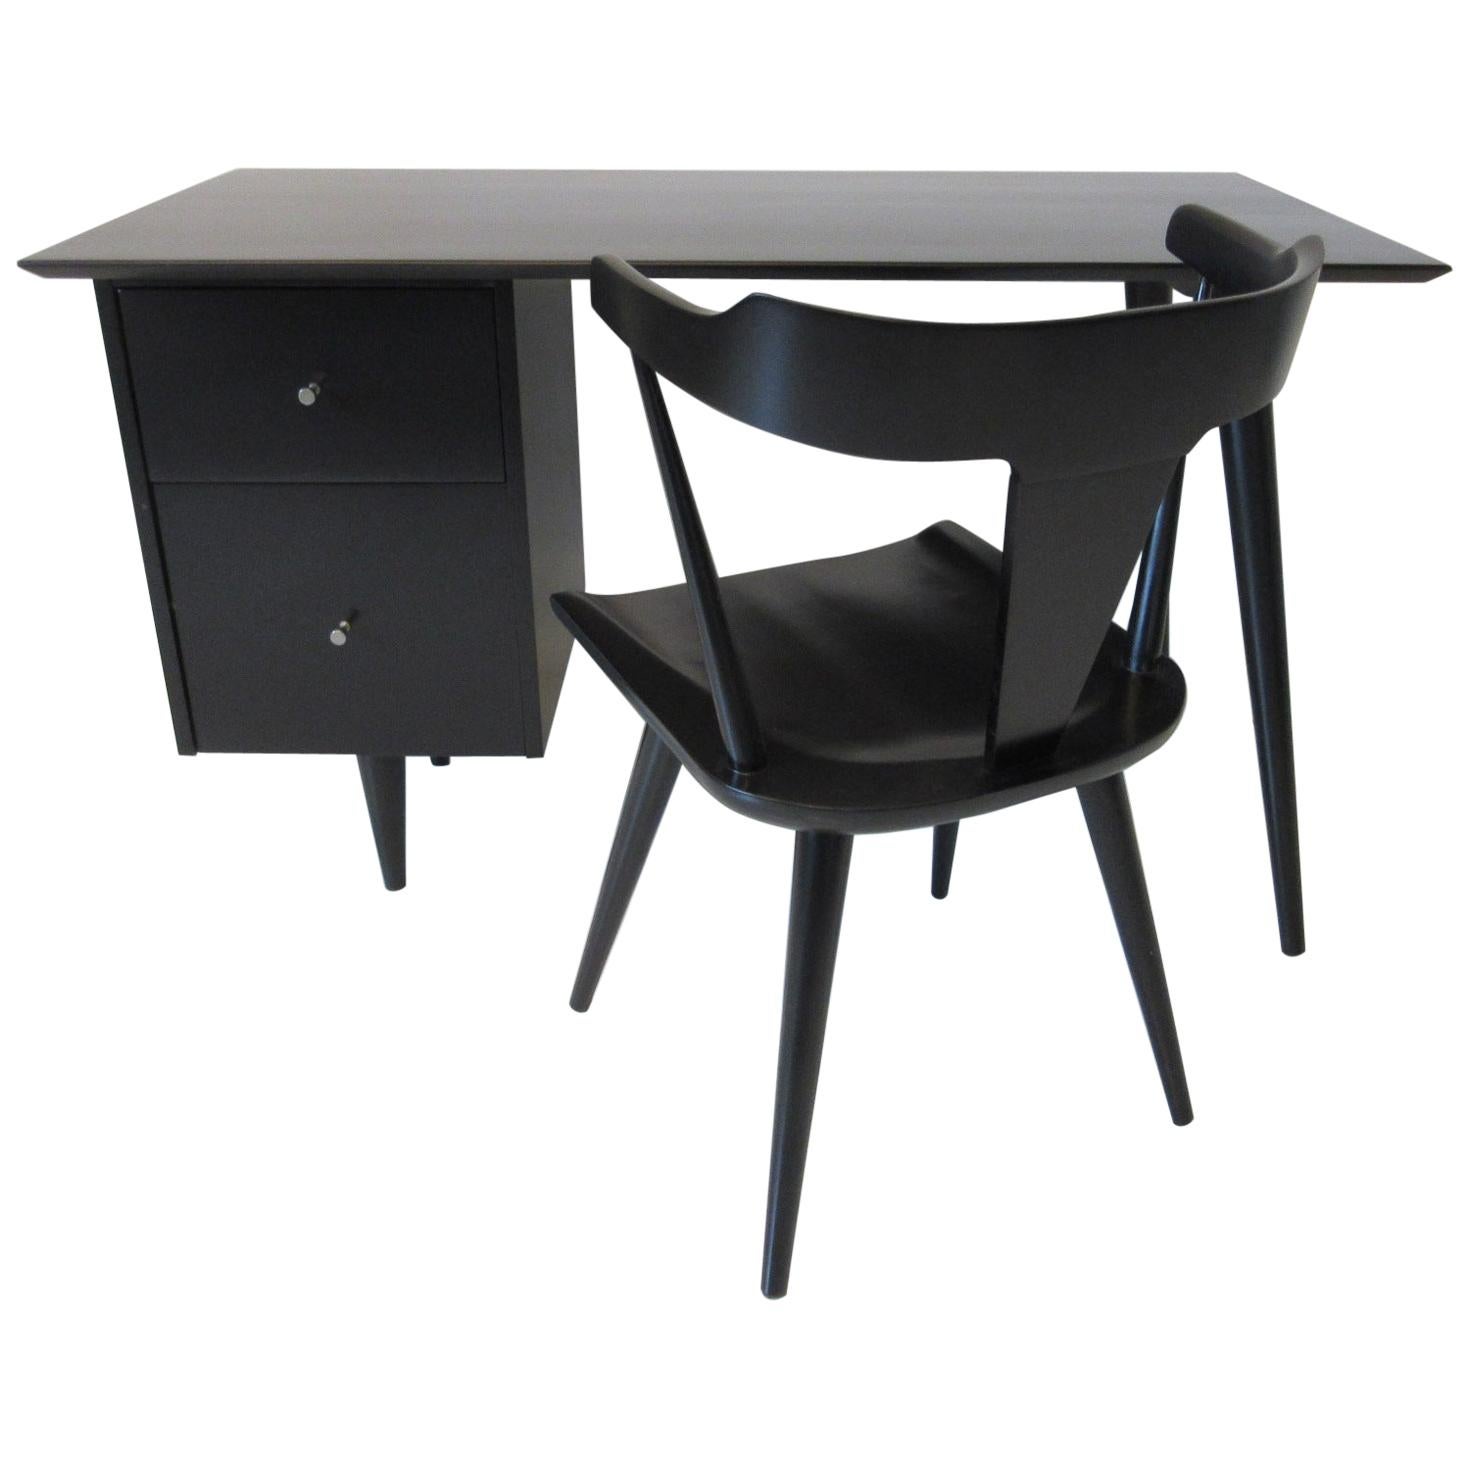 Paul McCobb Desk / Chair from the Planner Group